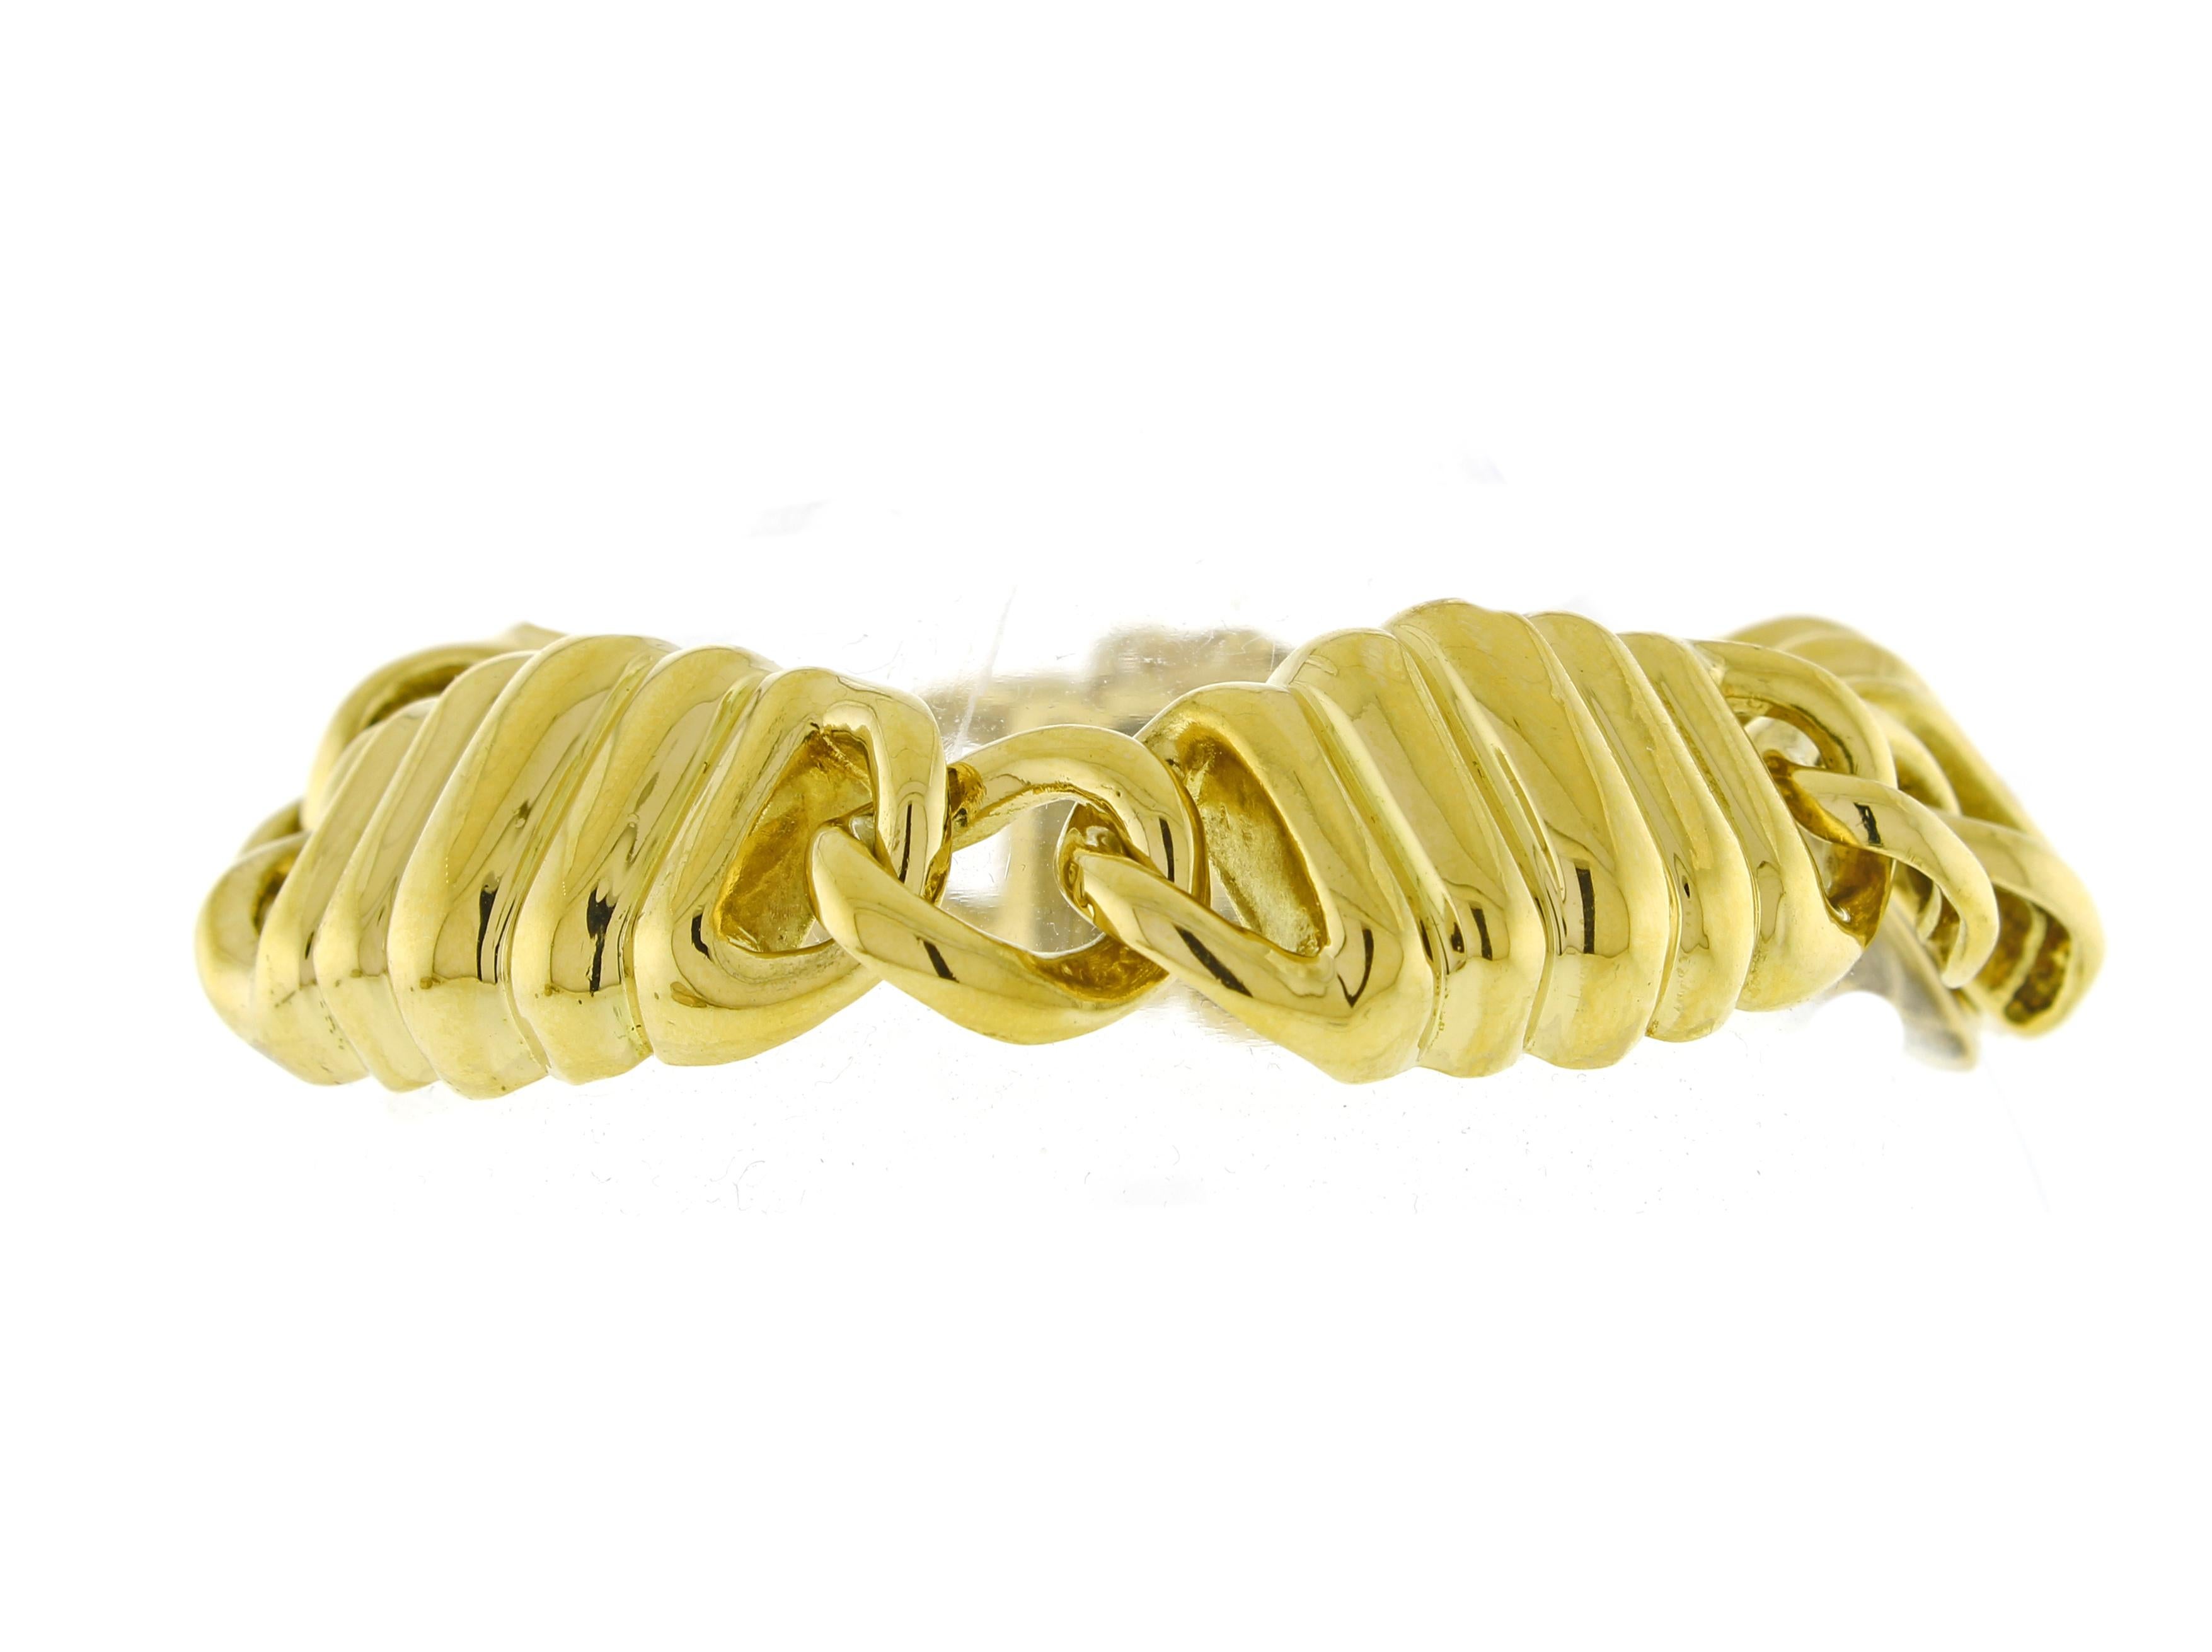 From Tiffany & Co., a wide grooved link bracelet.
♦ Designer: Tiffany & Co.
♦ Metal: 18 karat
♦ Circa 1980s
♦ 7½ inches long ¾ wide
♦ 51.8 grams
♦ Packaging: Pampillonia presentation box
♦ Condition: Excellent , pre-owned
♦ Price: Based on the